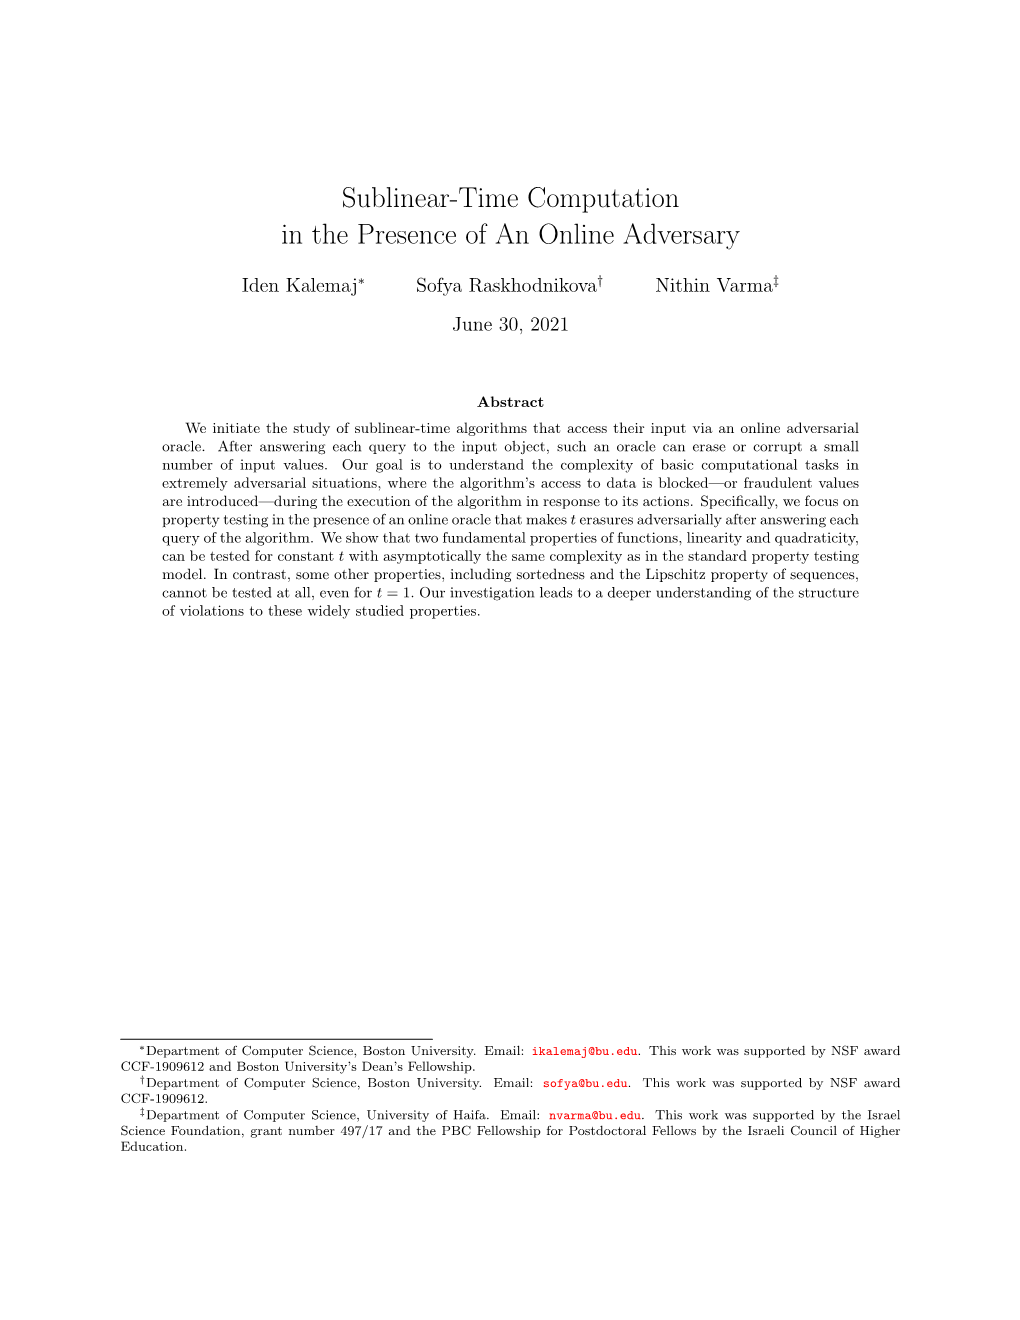 Sublinear-Time Computation in the Presence of an Online Adversary